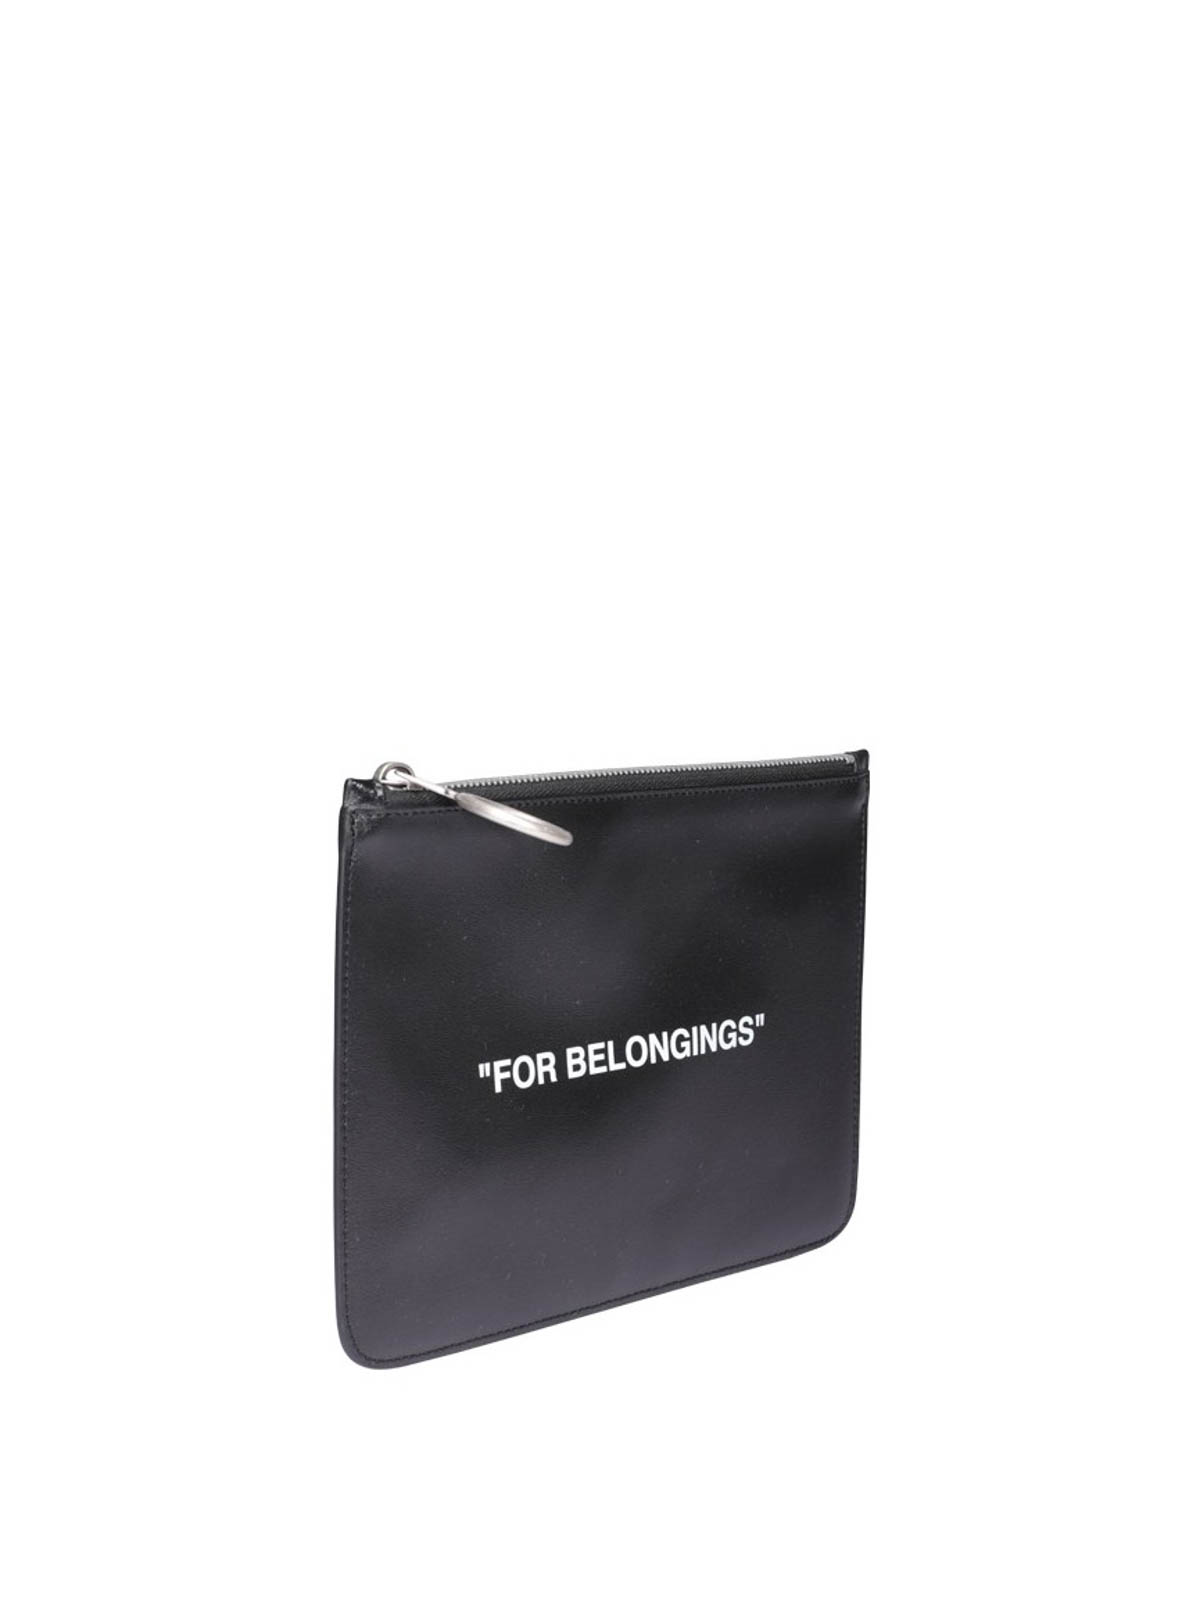 Off-White - Quote clutch - OMNF010R208530381001 | iKRIX.com